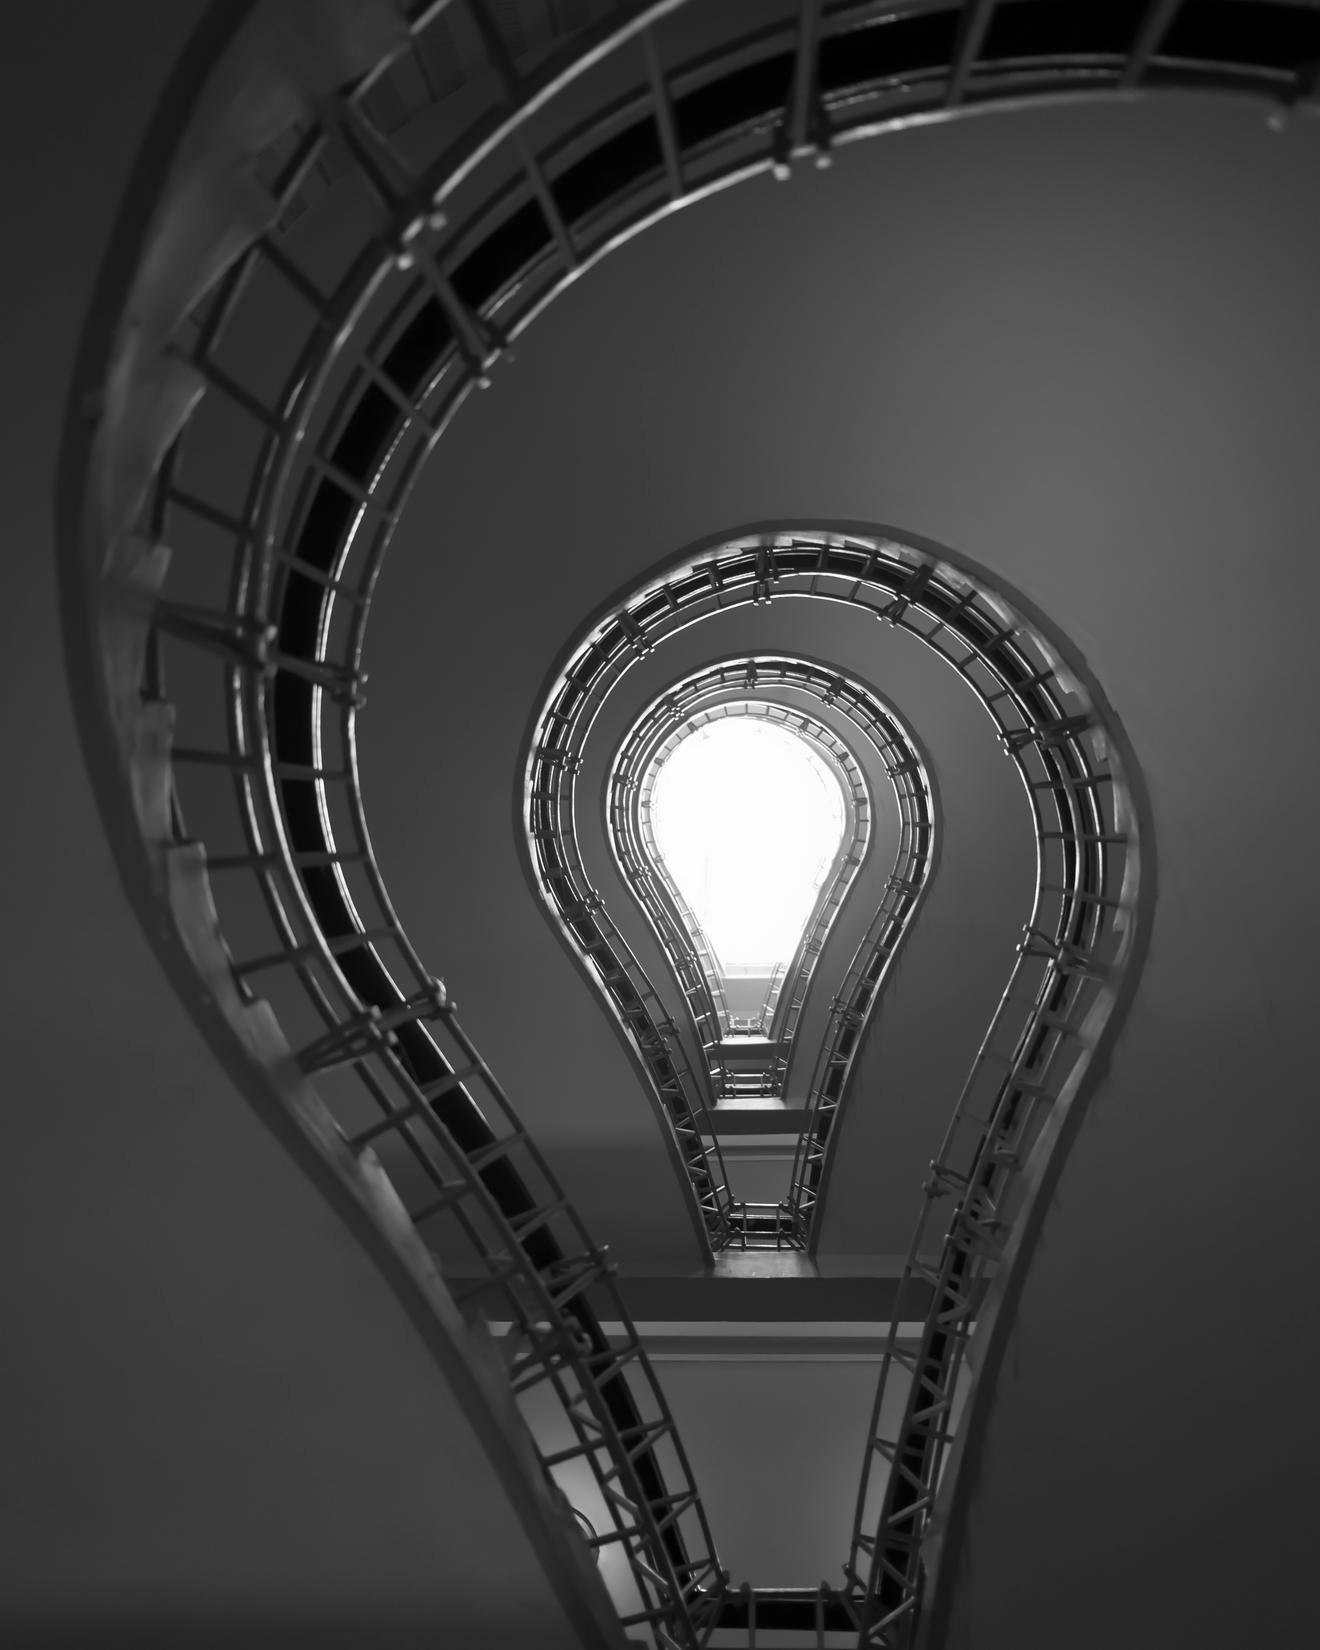 artistic view of lightbulb surround by a sweeping staircase